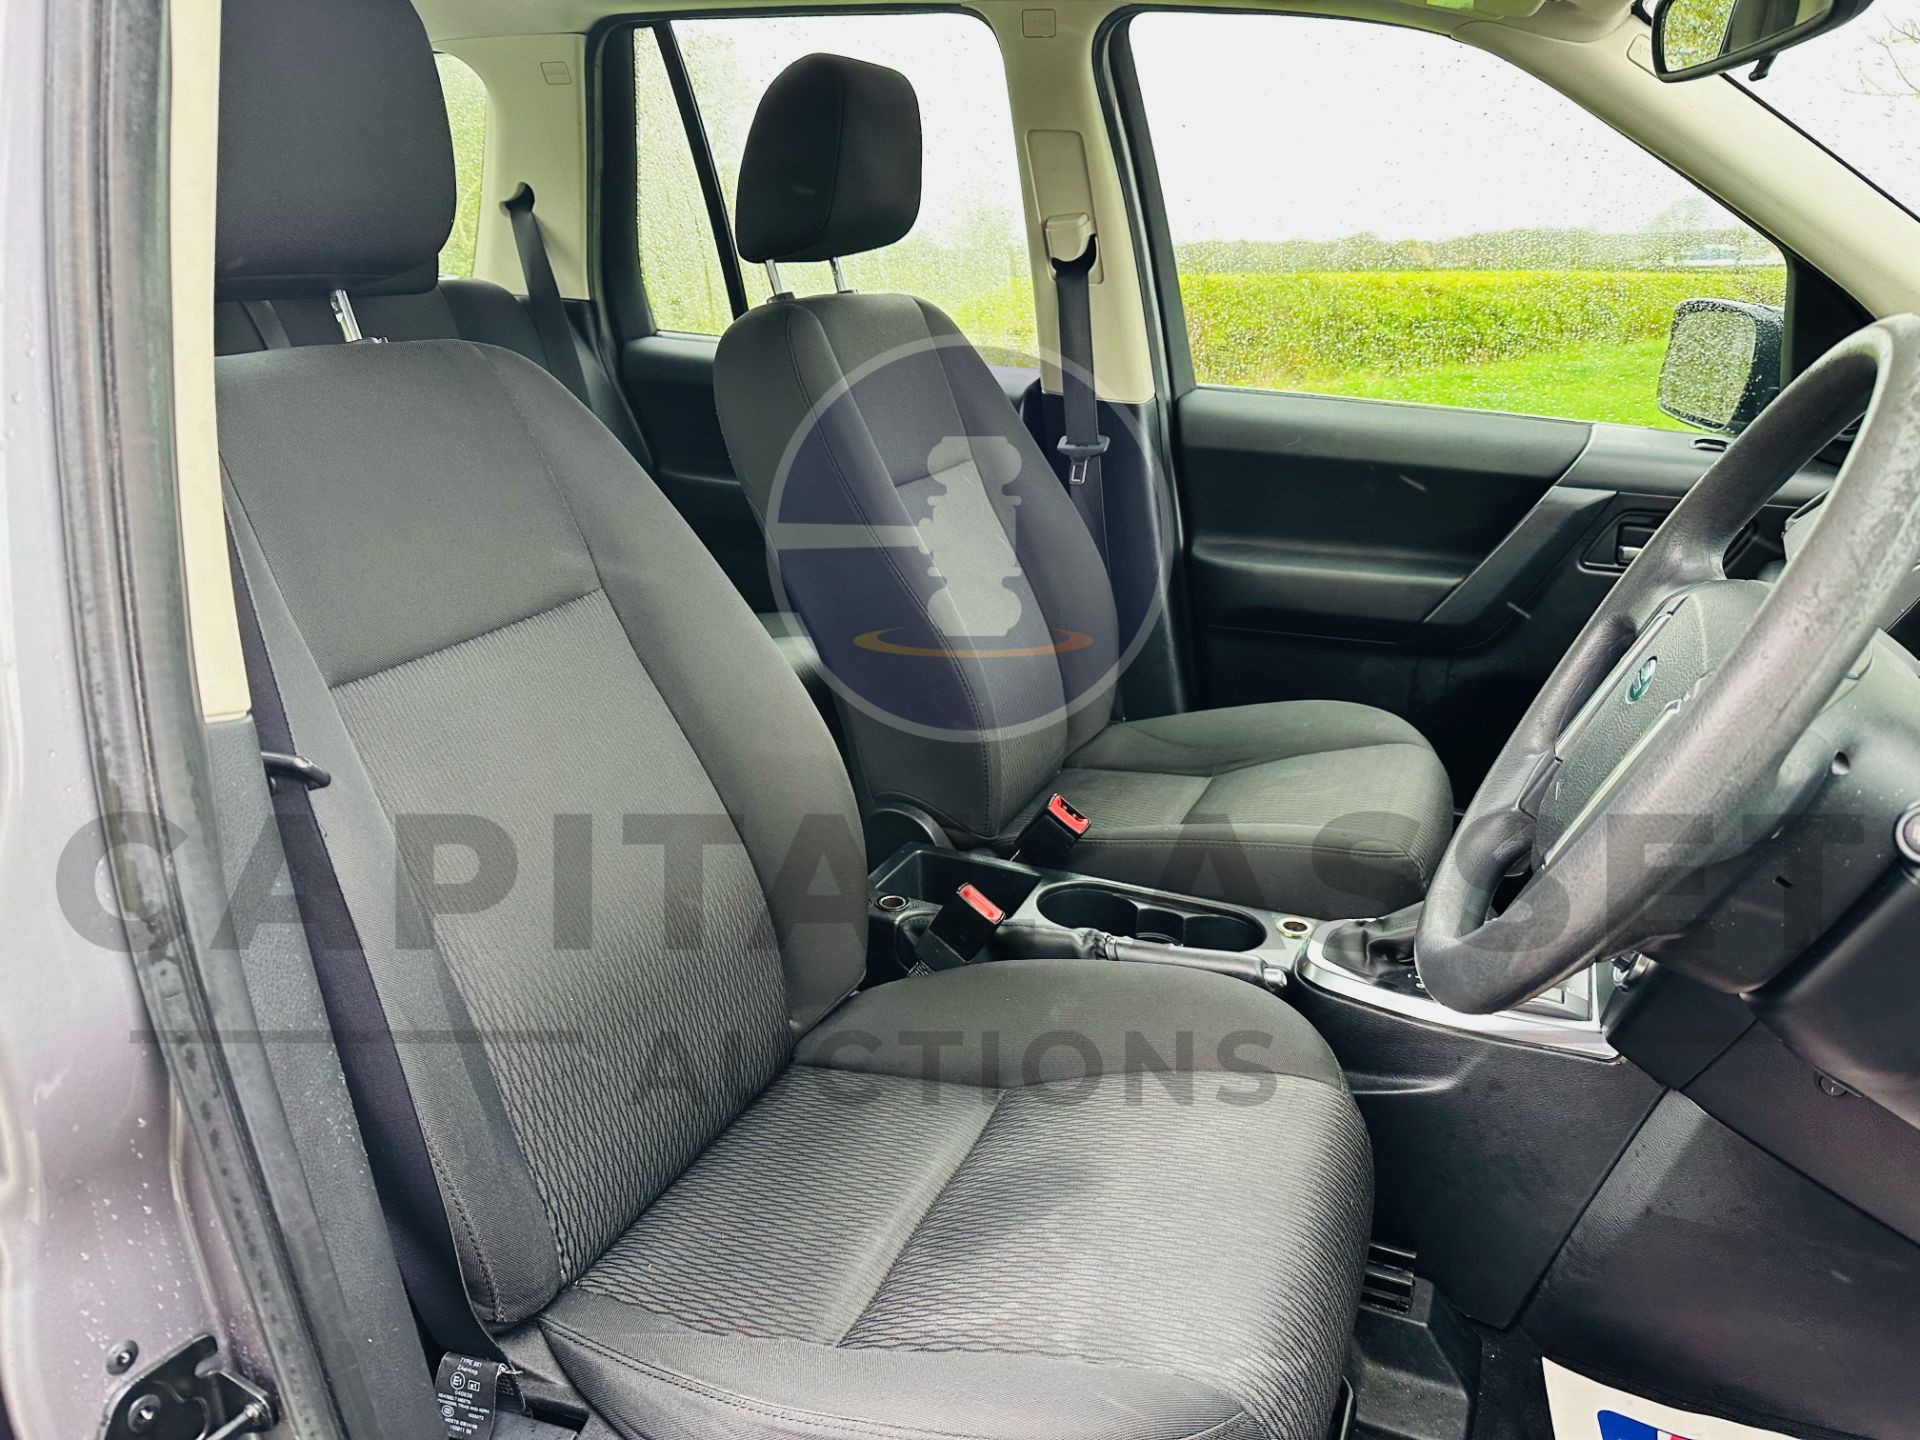 (ON SALE) LANDROVER FREELANDER 2.2TD4 S EDITION "AUTO - 2012 MODEL - AIR CON - FSH - Image 25 of 33